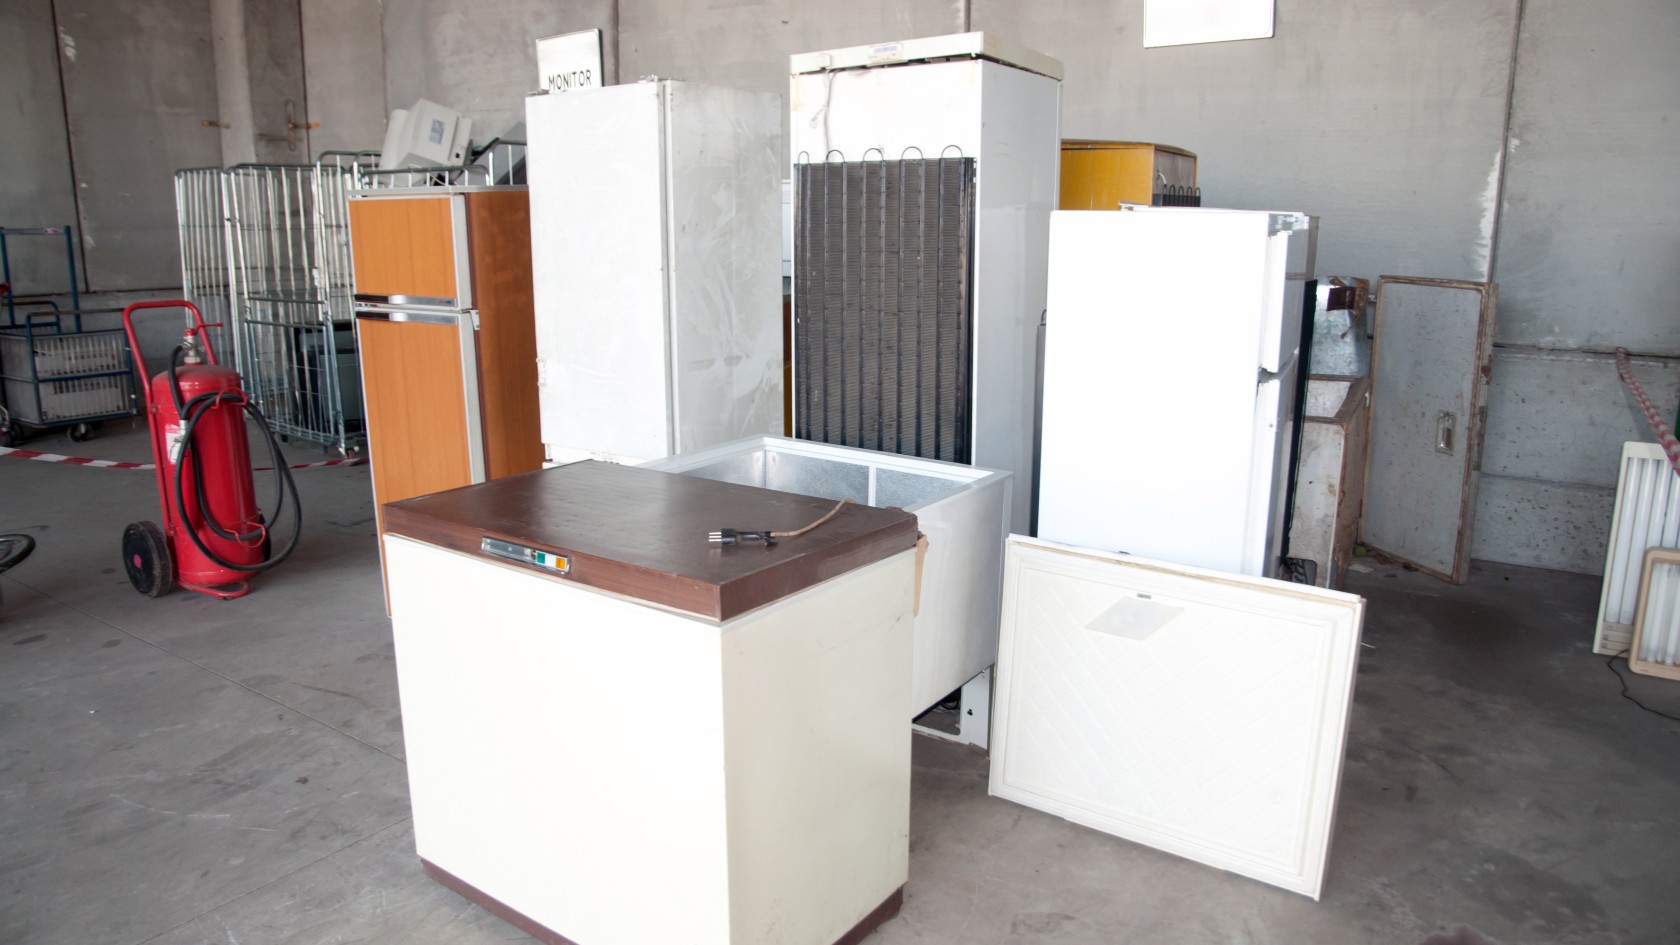 How To Dispose Old Appliances After A Kitchen Remodel